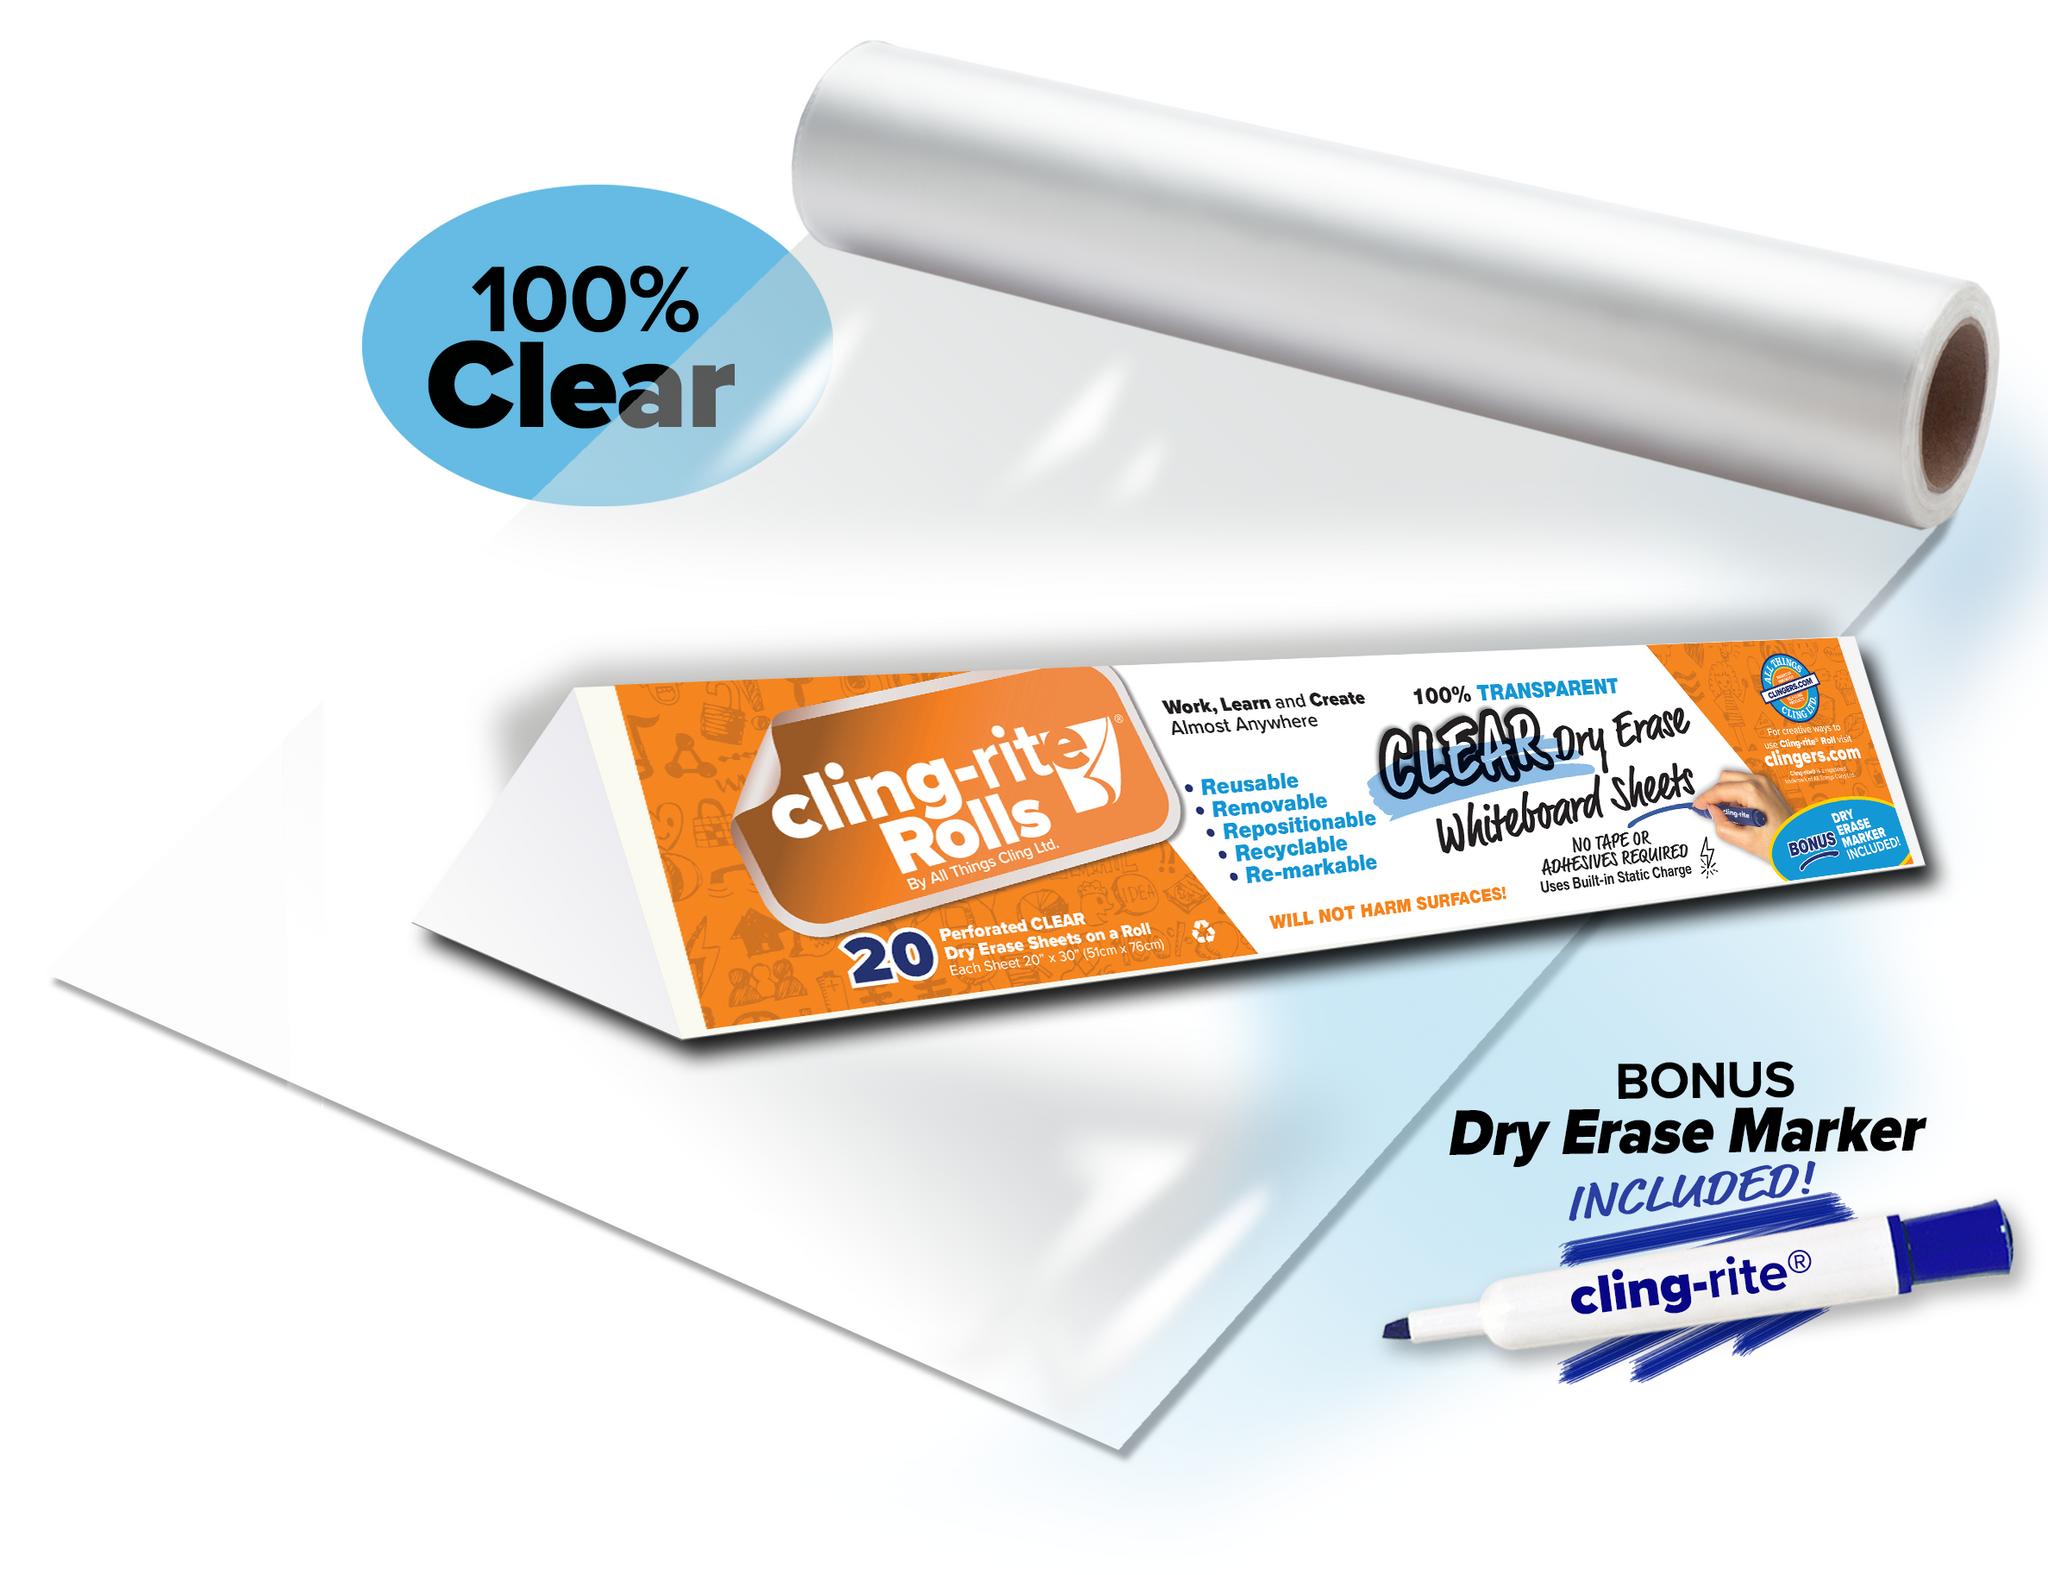 The Easy Way to Get Cling Wrap to Actually Cling to Stuff